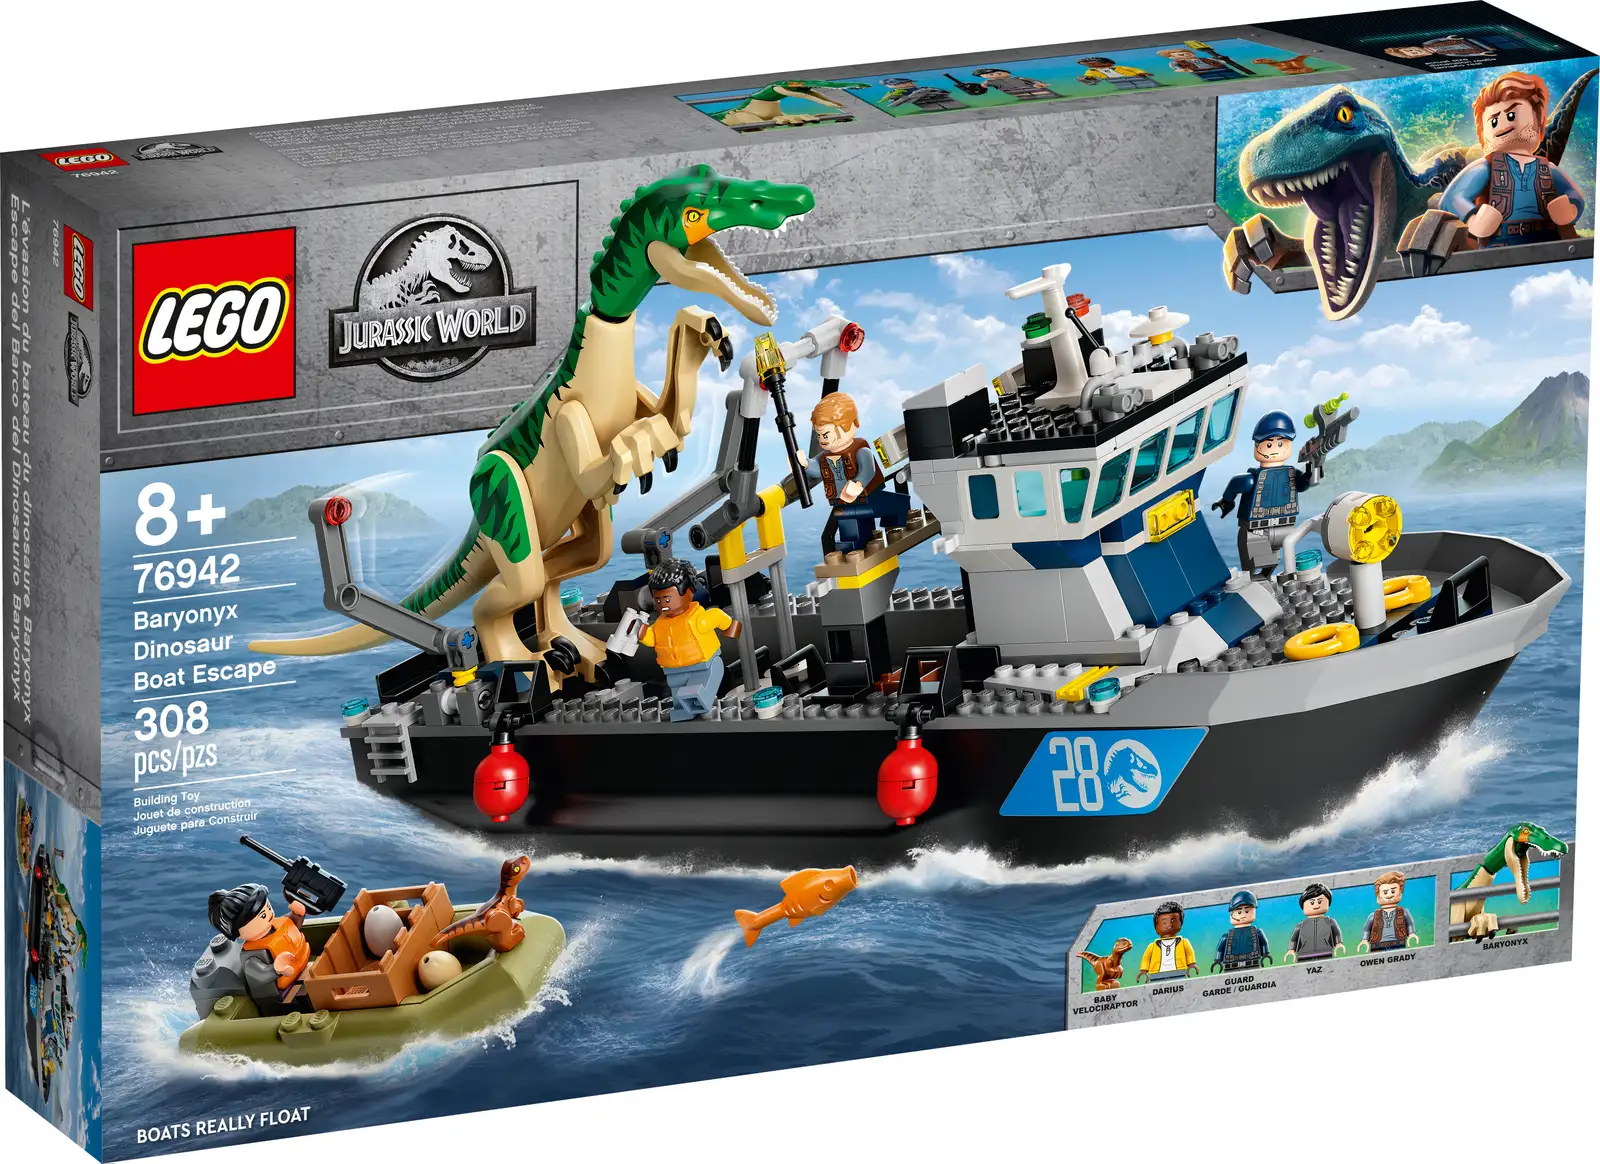 Kids can take the LEGO® Jurassic World action to the water with this Baryonyx Dinosaur Boat Escape (76942) toy playset. The first LEGO Jurassic World set ever to feature boats, it includes a brick-built boat that floats, even when carrying the posable Baryonyx dinosaur figure. The boat has a dinosaur cage, rotating ‘searchlight’ and a control room that detaches for easy access to the cargo hold. Creative building and play A great gift toy for trend-setting kids, this set also includes a baby dinosaur and 2 fish figures, 4 LEGO minifigures and lots of accessory elements, such as a tranquilizer, Taser, dinosaur eggs, life jackets and more to inspire storytelling. Step-by-step instructions are included so even LEGO newcomers can enjoy the building experience. World of dinosaur action The LEGO Jurassic World range has premium-quality sets to excite all ages, with molded, buildable dinosaur figures, minifigures, impressive buildings and cool vehicles for play and display. Kids can role-play an exciting Baryonyx Dinosaur Boat Escape with this awesome LEGO® Jurassic World toy playset (76942), featuring a cool, buildable boat that floats – even with a dinosaur on board! Includes 4 minifigures: Darius, Yaz, Owen Grady and a guard, plus a posable Baryonyx, baby dinosaur and 2 fish toy figures, and accessory elements including a tranquilizer, Taser and 2 dinosaur eggs. The boat features a control room that can be lifted off for easy access to the cargo hold, adinosaur cage and a rotating ‘searchlight’. The set also includes a small toy speedboat that floats. Inspired by Jurassic World Camp Cretaceous and other Jurassic World stories, this premium-quality toy playset makes a top Christmas gift, birthday present or awesome treat for kids aged 8 and up. The large, floating boat toy measures over 5.5 in. (14 cm) high, 16 in. (40 cm) long and 5 in. (13 cm) wide. It’s the first LEGO® Jurassic World set to include boats! Is your dinosaur-loving youngster new to building with LEGO® bricks? No problem. This 308-piece set comes with illustrated, step-by-step instructions so they can build with confidence. LEGO® Jurassic World creative building sets allow kids (and adult fans) to relive scenes from the animated series and movies, make up their own stories or just display the cool models. LEGO® components comply with strict industry standards to ensure simple, strong connections and robust builds. LEGO® bricks and pieces are tested to the max to make sure that they satisfy demanding global safety standards.